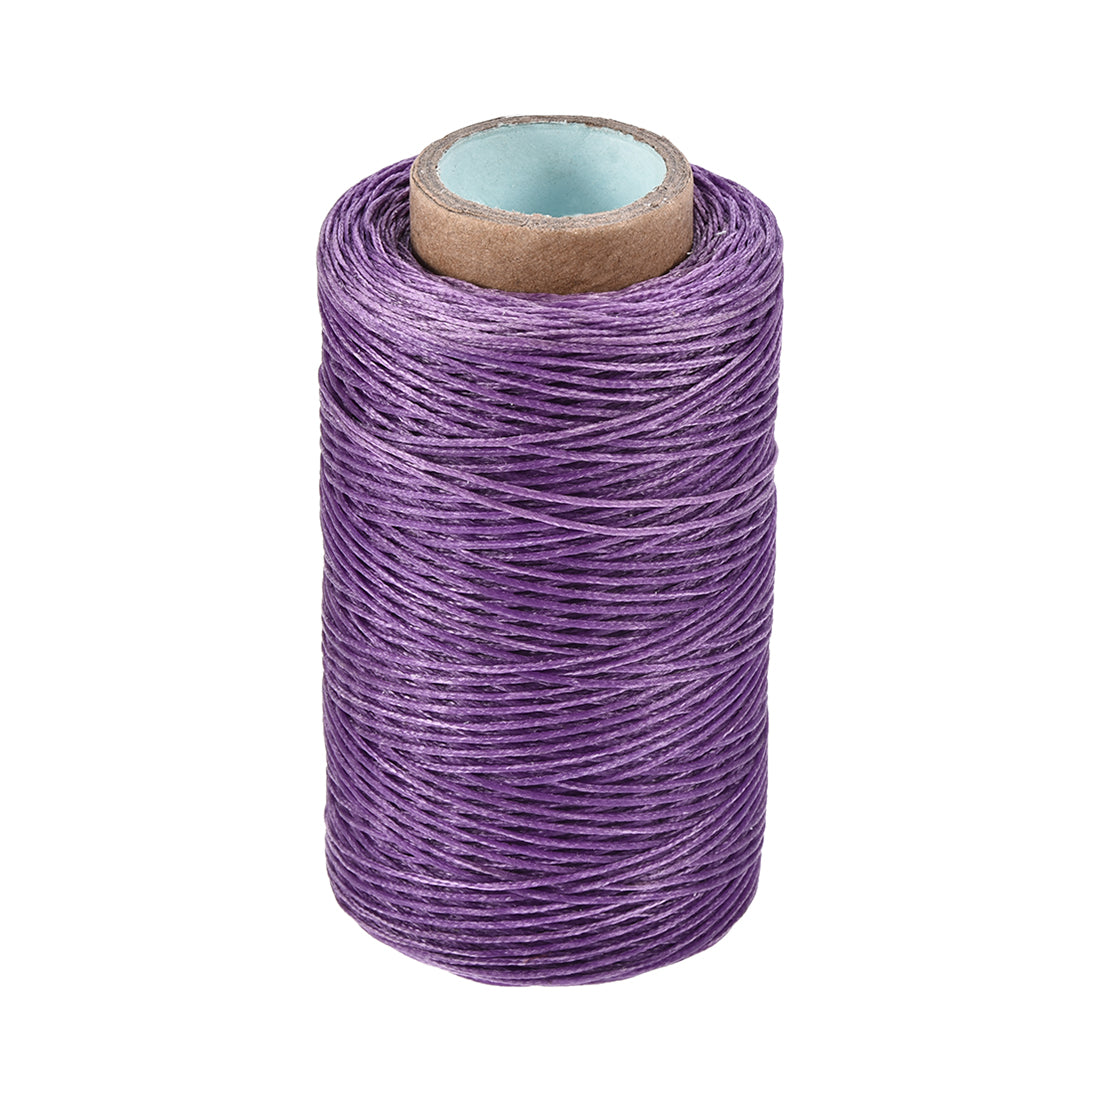 Uxcell Uxcell Leather Sewing Thread 273Yards 150D/1mm Waxed Cord Stitching Flat Thread, Purple